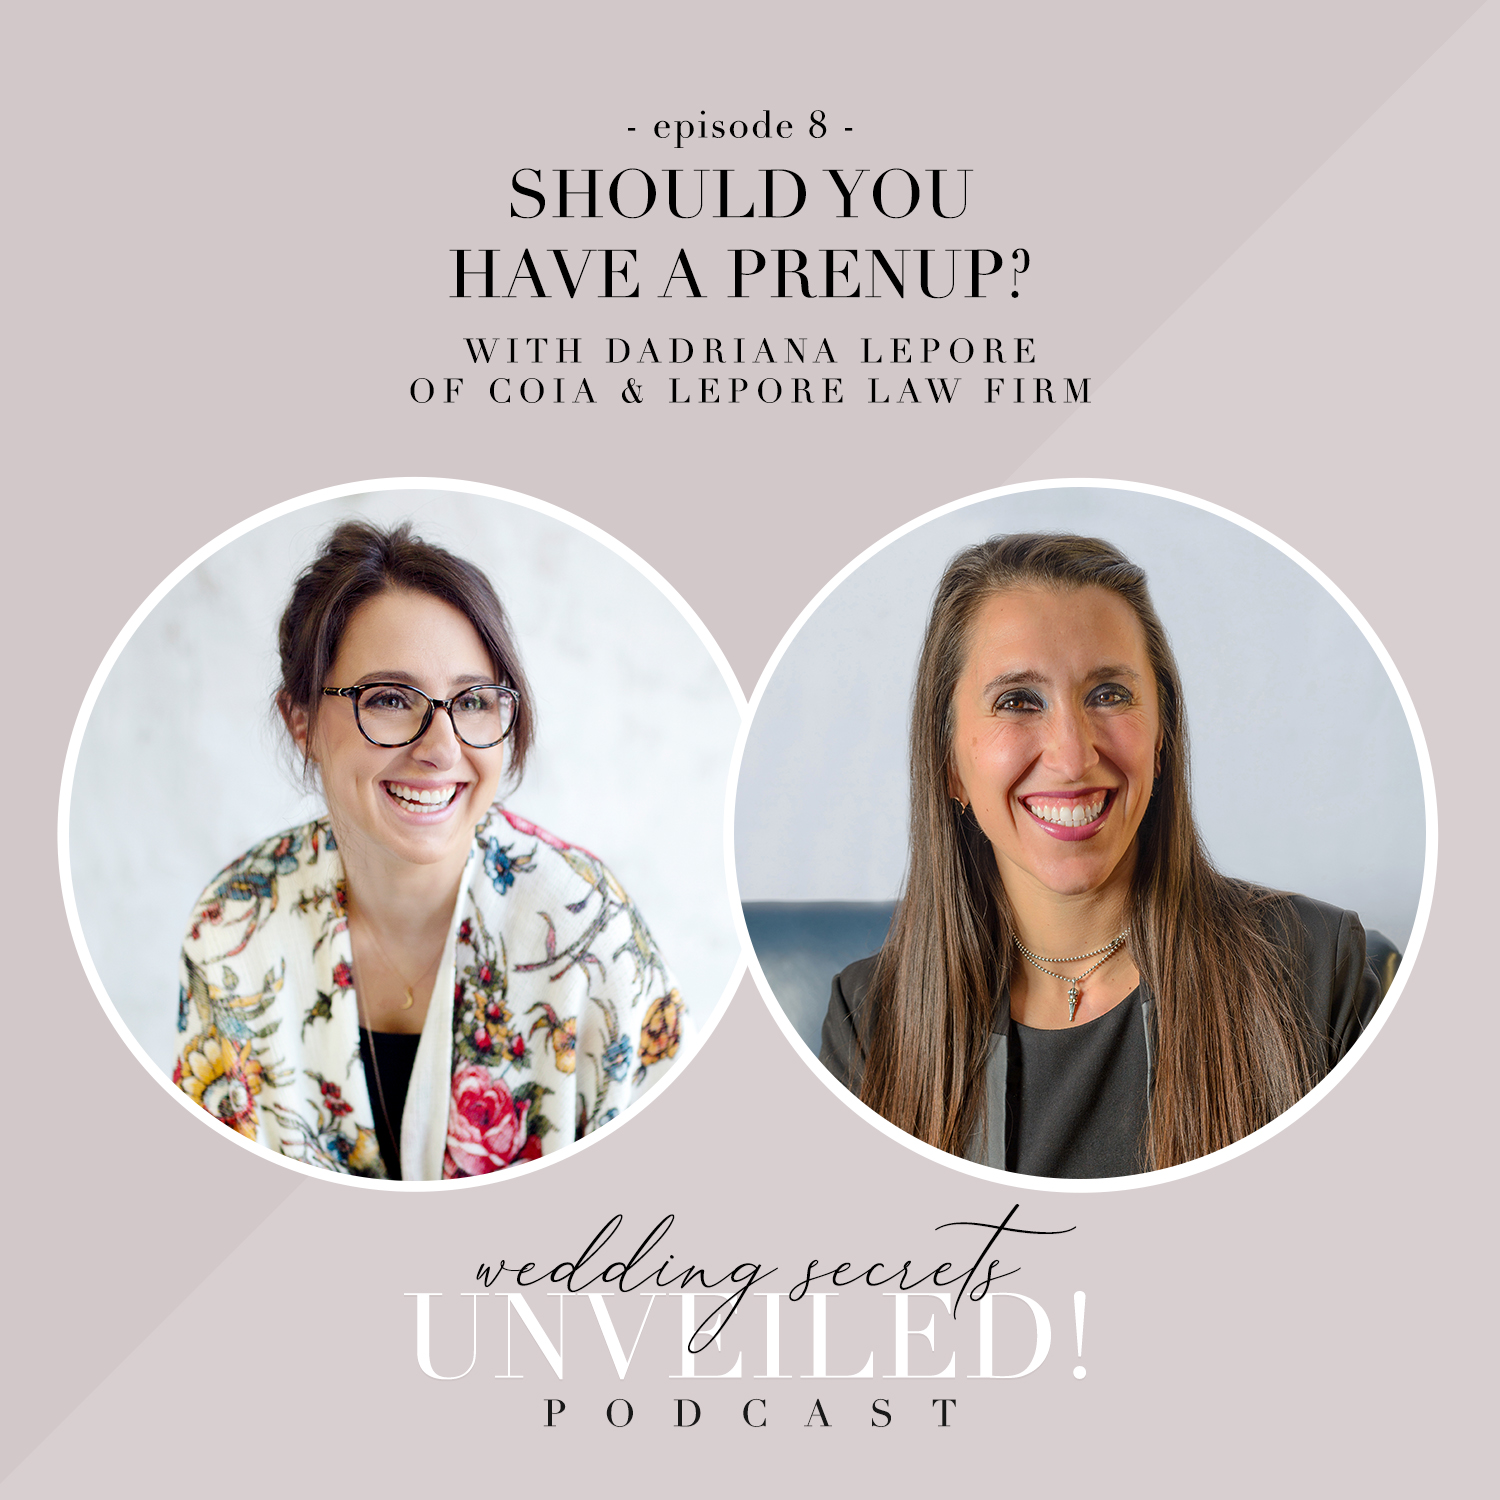 Should you have a prenup? Podcast episode with Dadriana Lepore of Coia & Lepore Law Firm